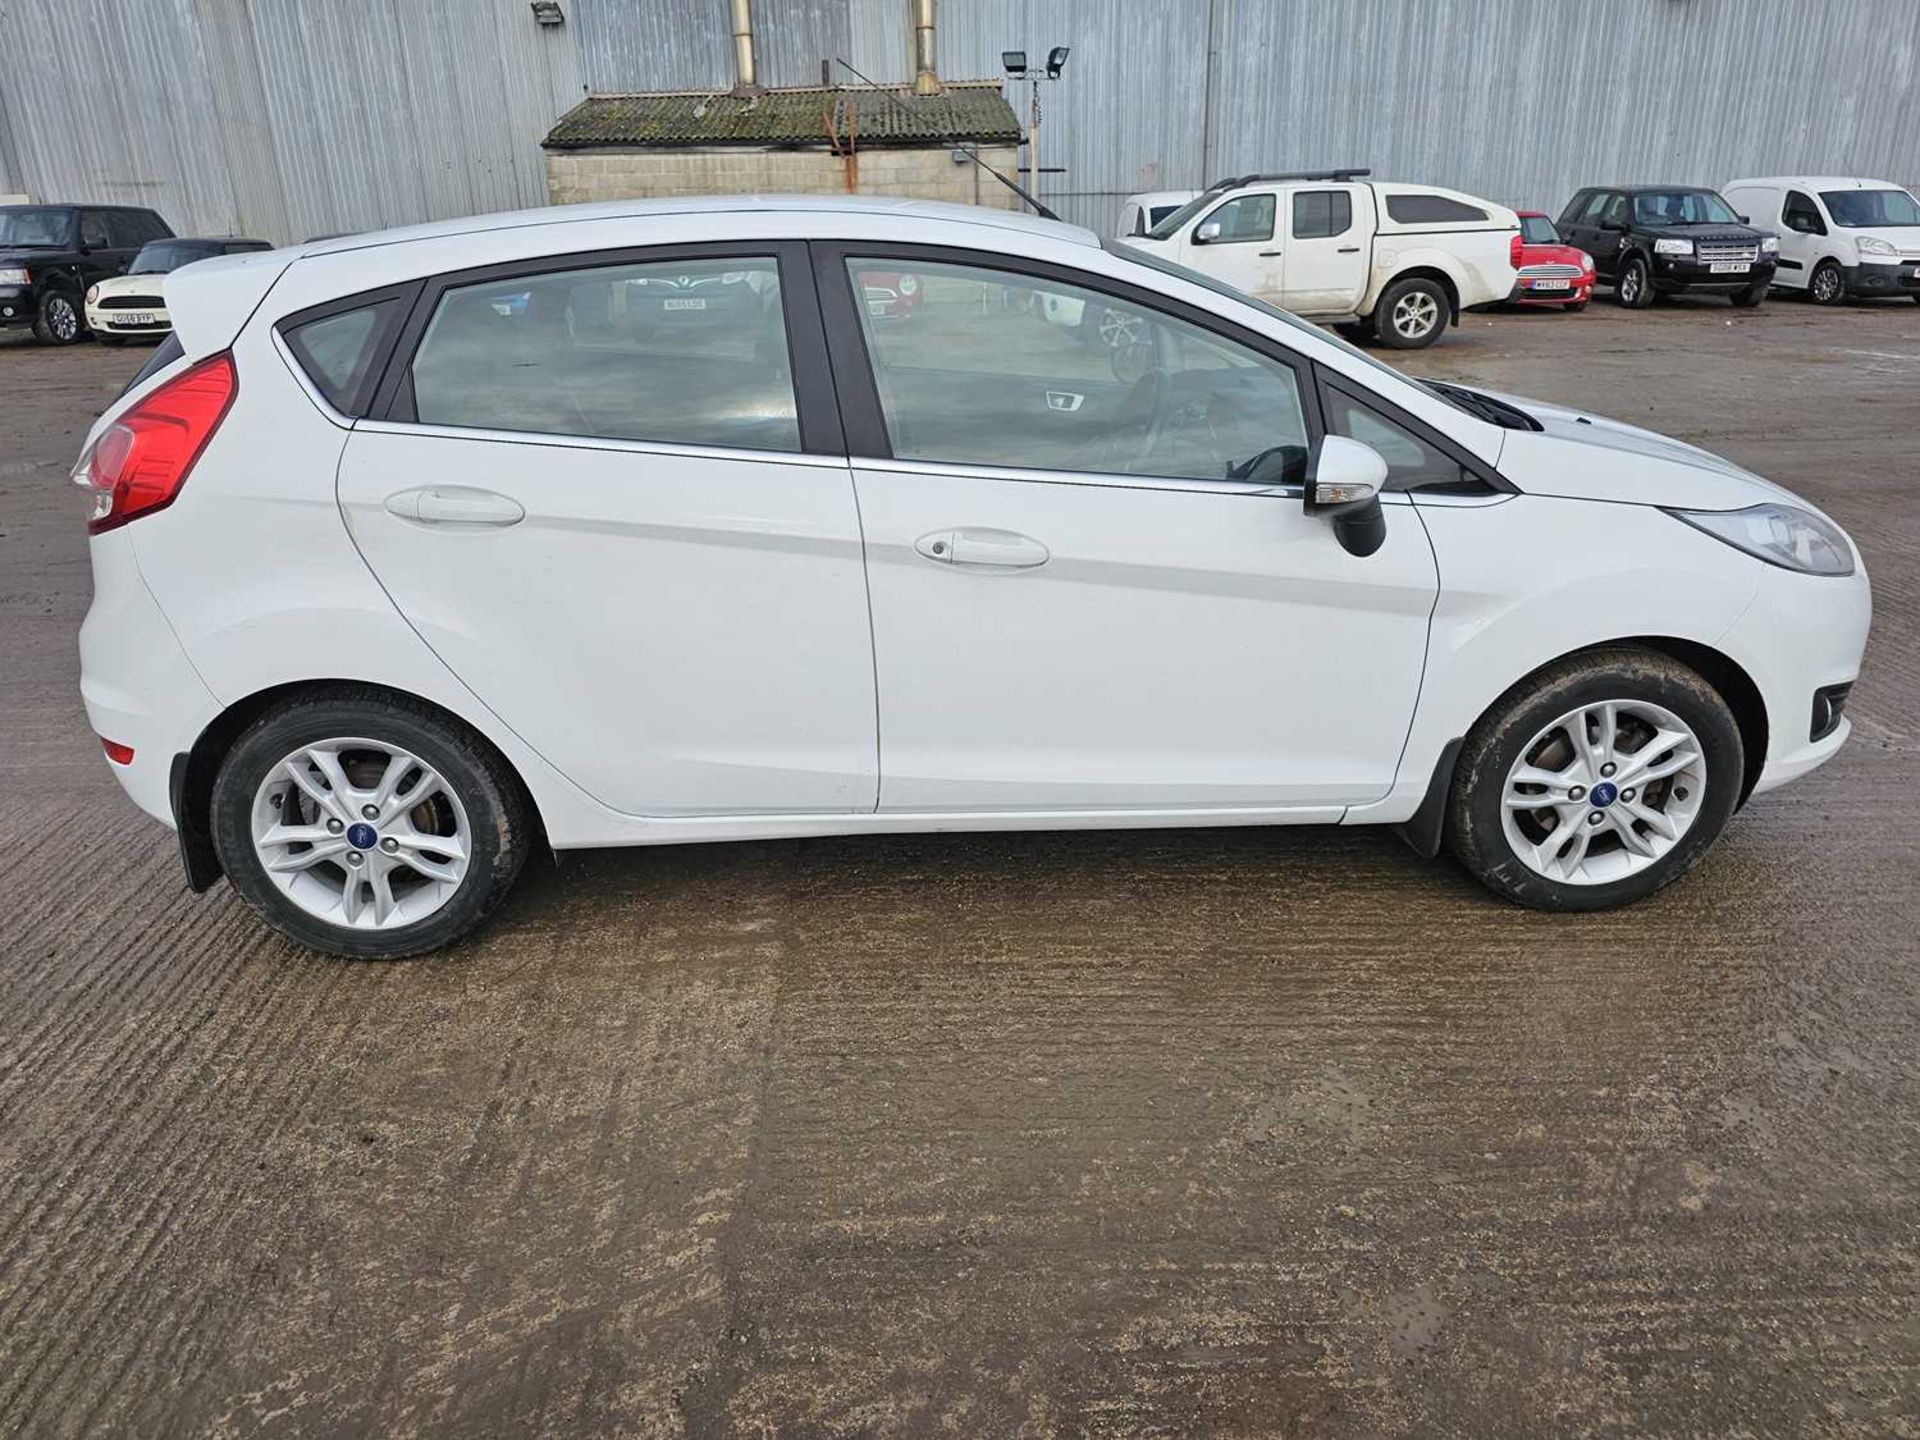 2015 Ford Fiesta, 5 Speed, Bluetooth, A/C (Reg. Docs. & Service History Available, Tested 01/25) - Image 7 of 28